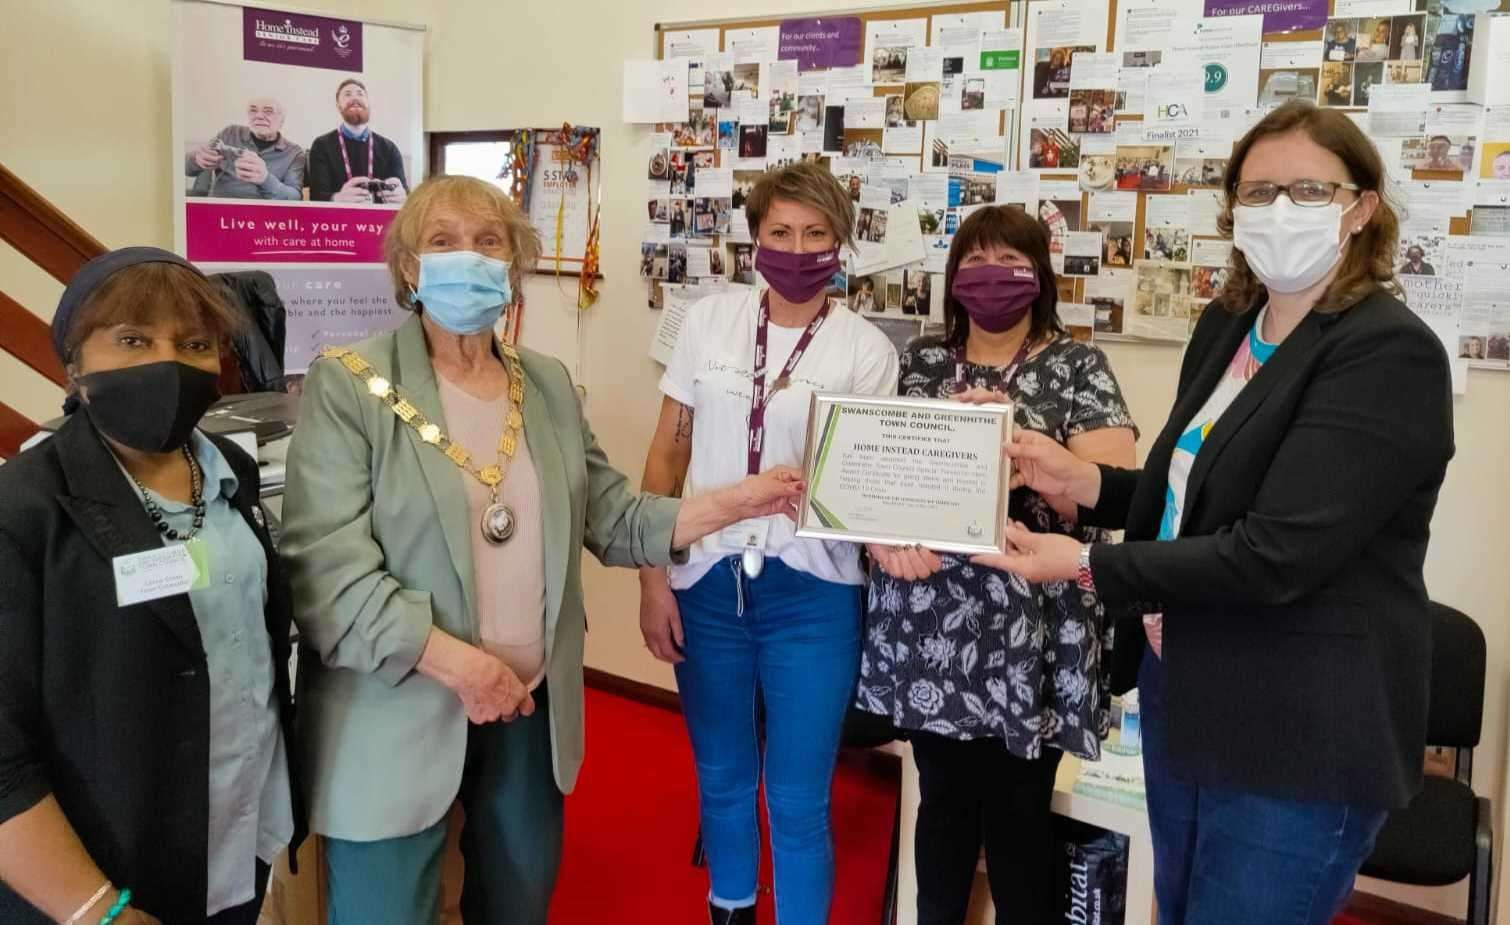 Town Mayor, Councillor Lesley Howes, visited Home Instead Dartford to present the award certificate to their caregivers